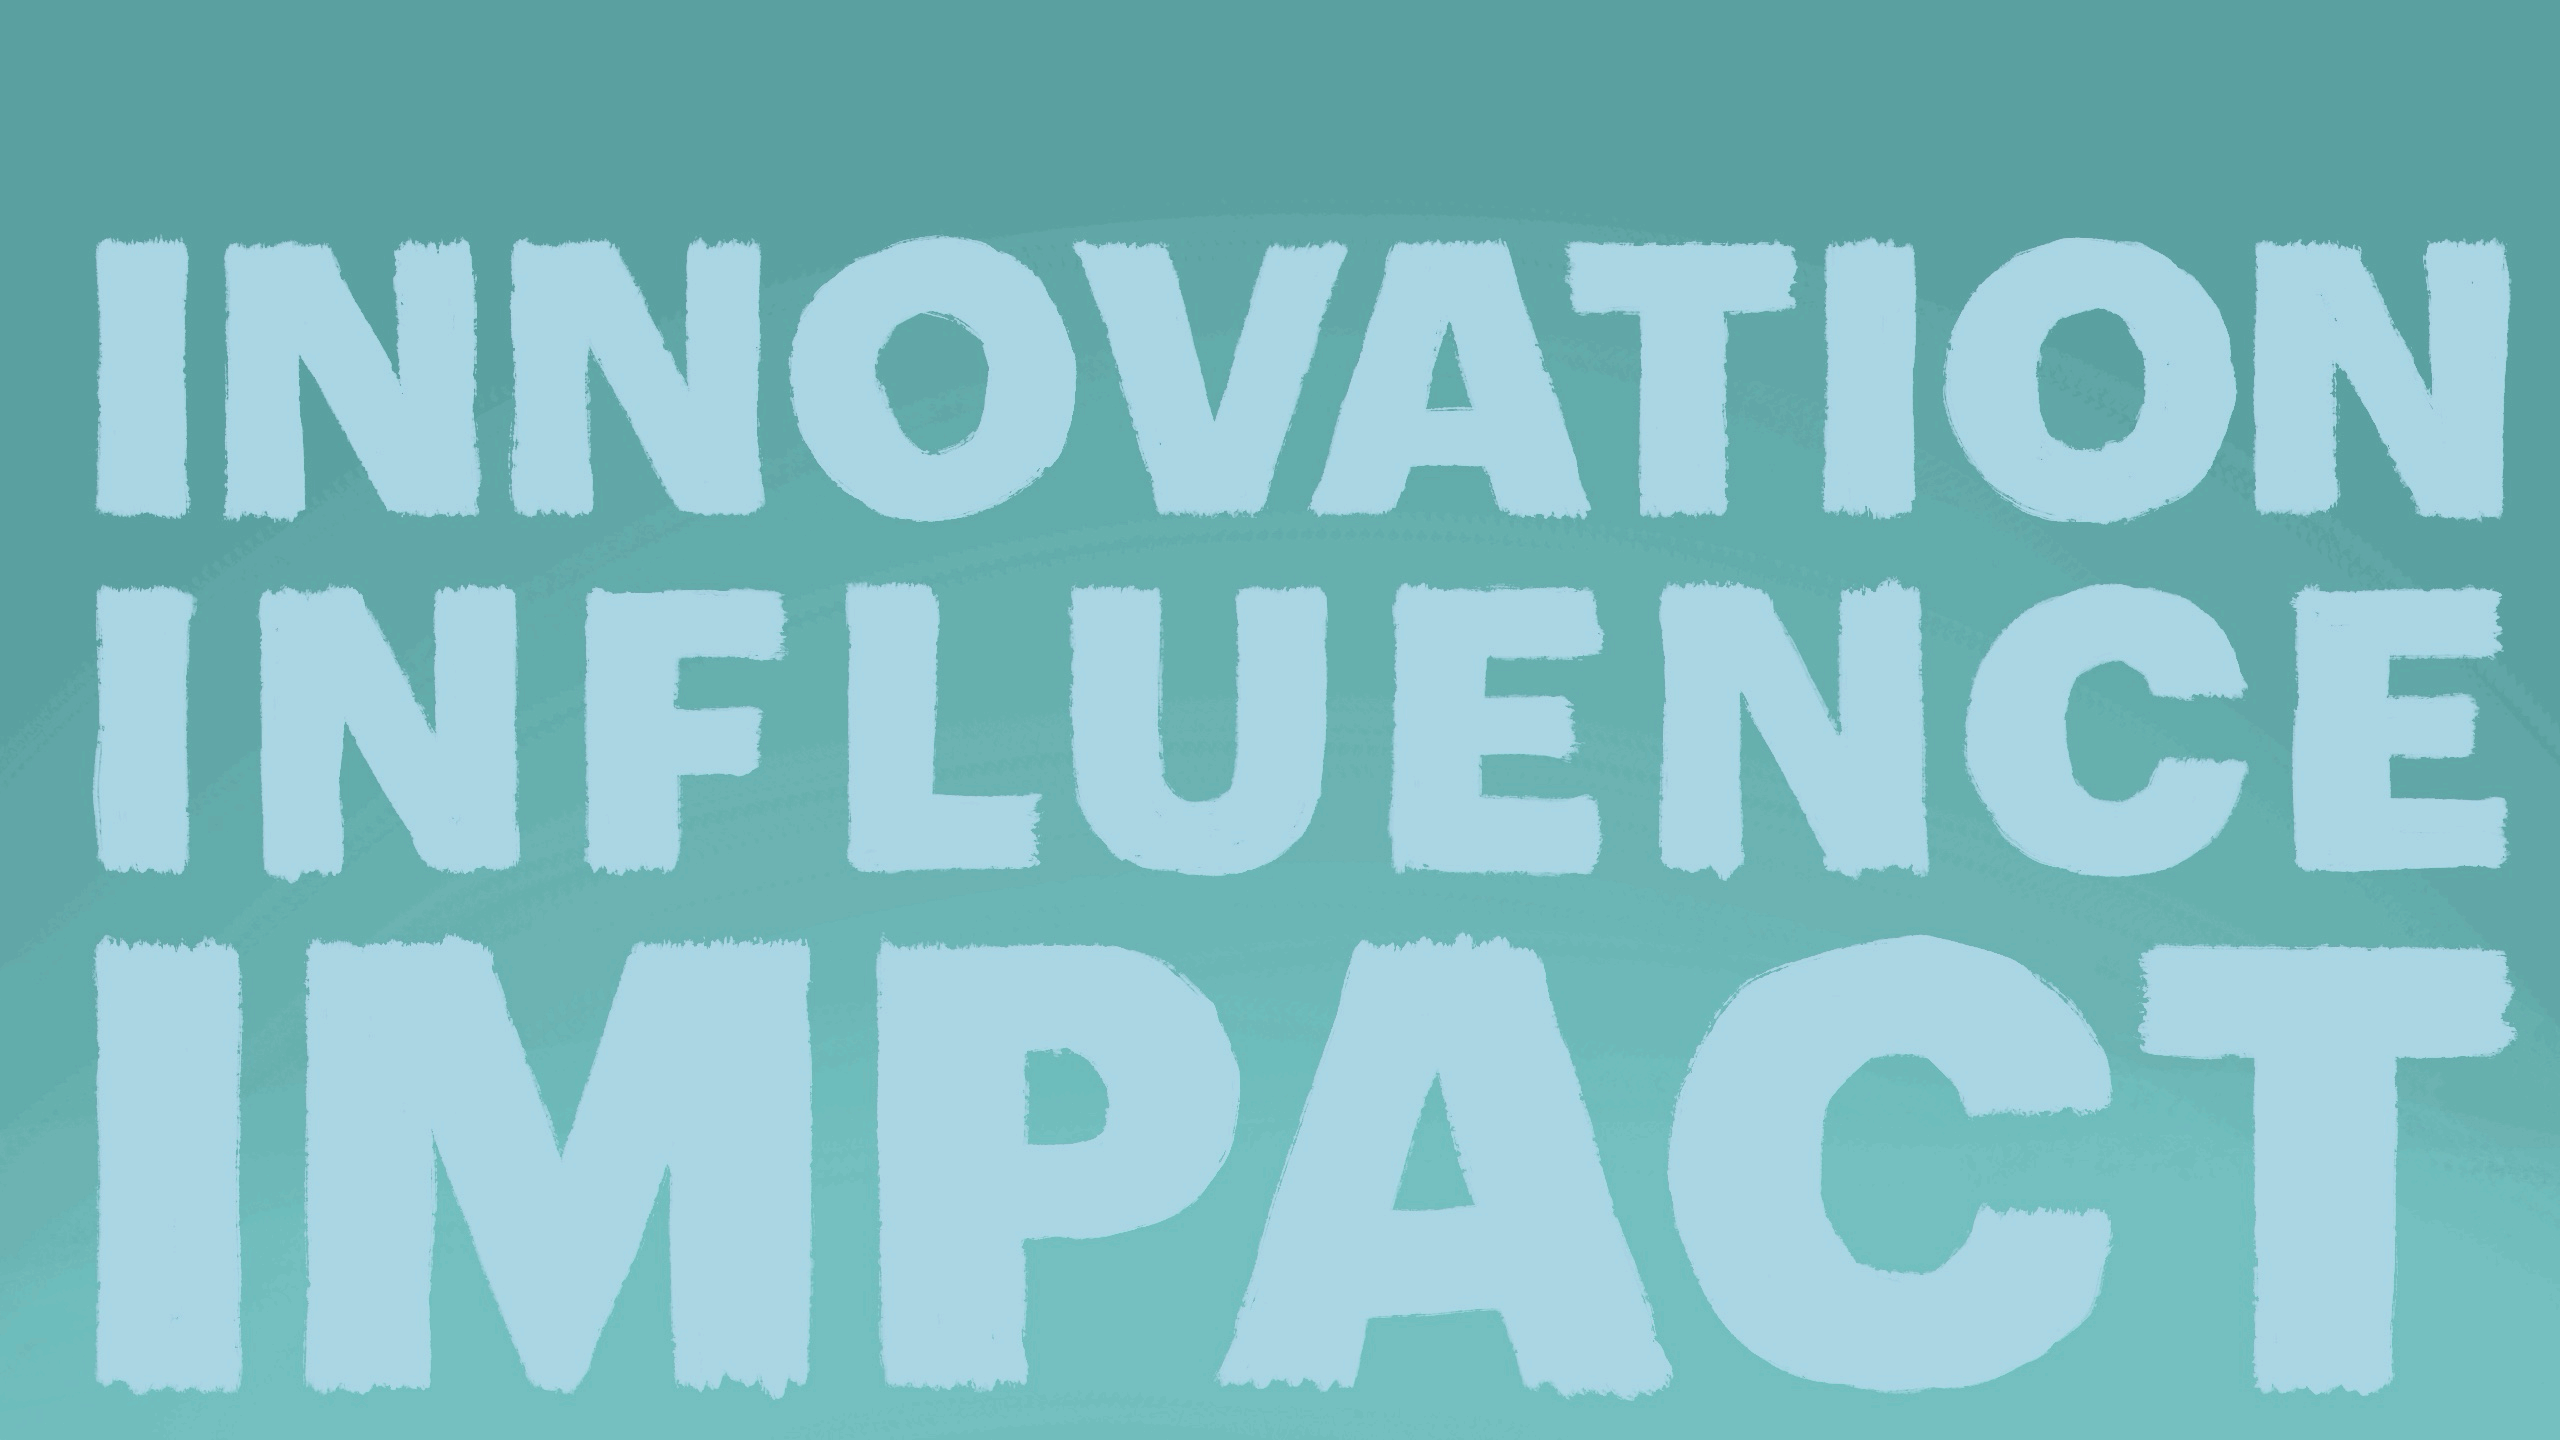 Hand-drawn letters reading "Innovation, Influence, Impact"